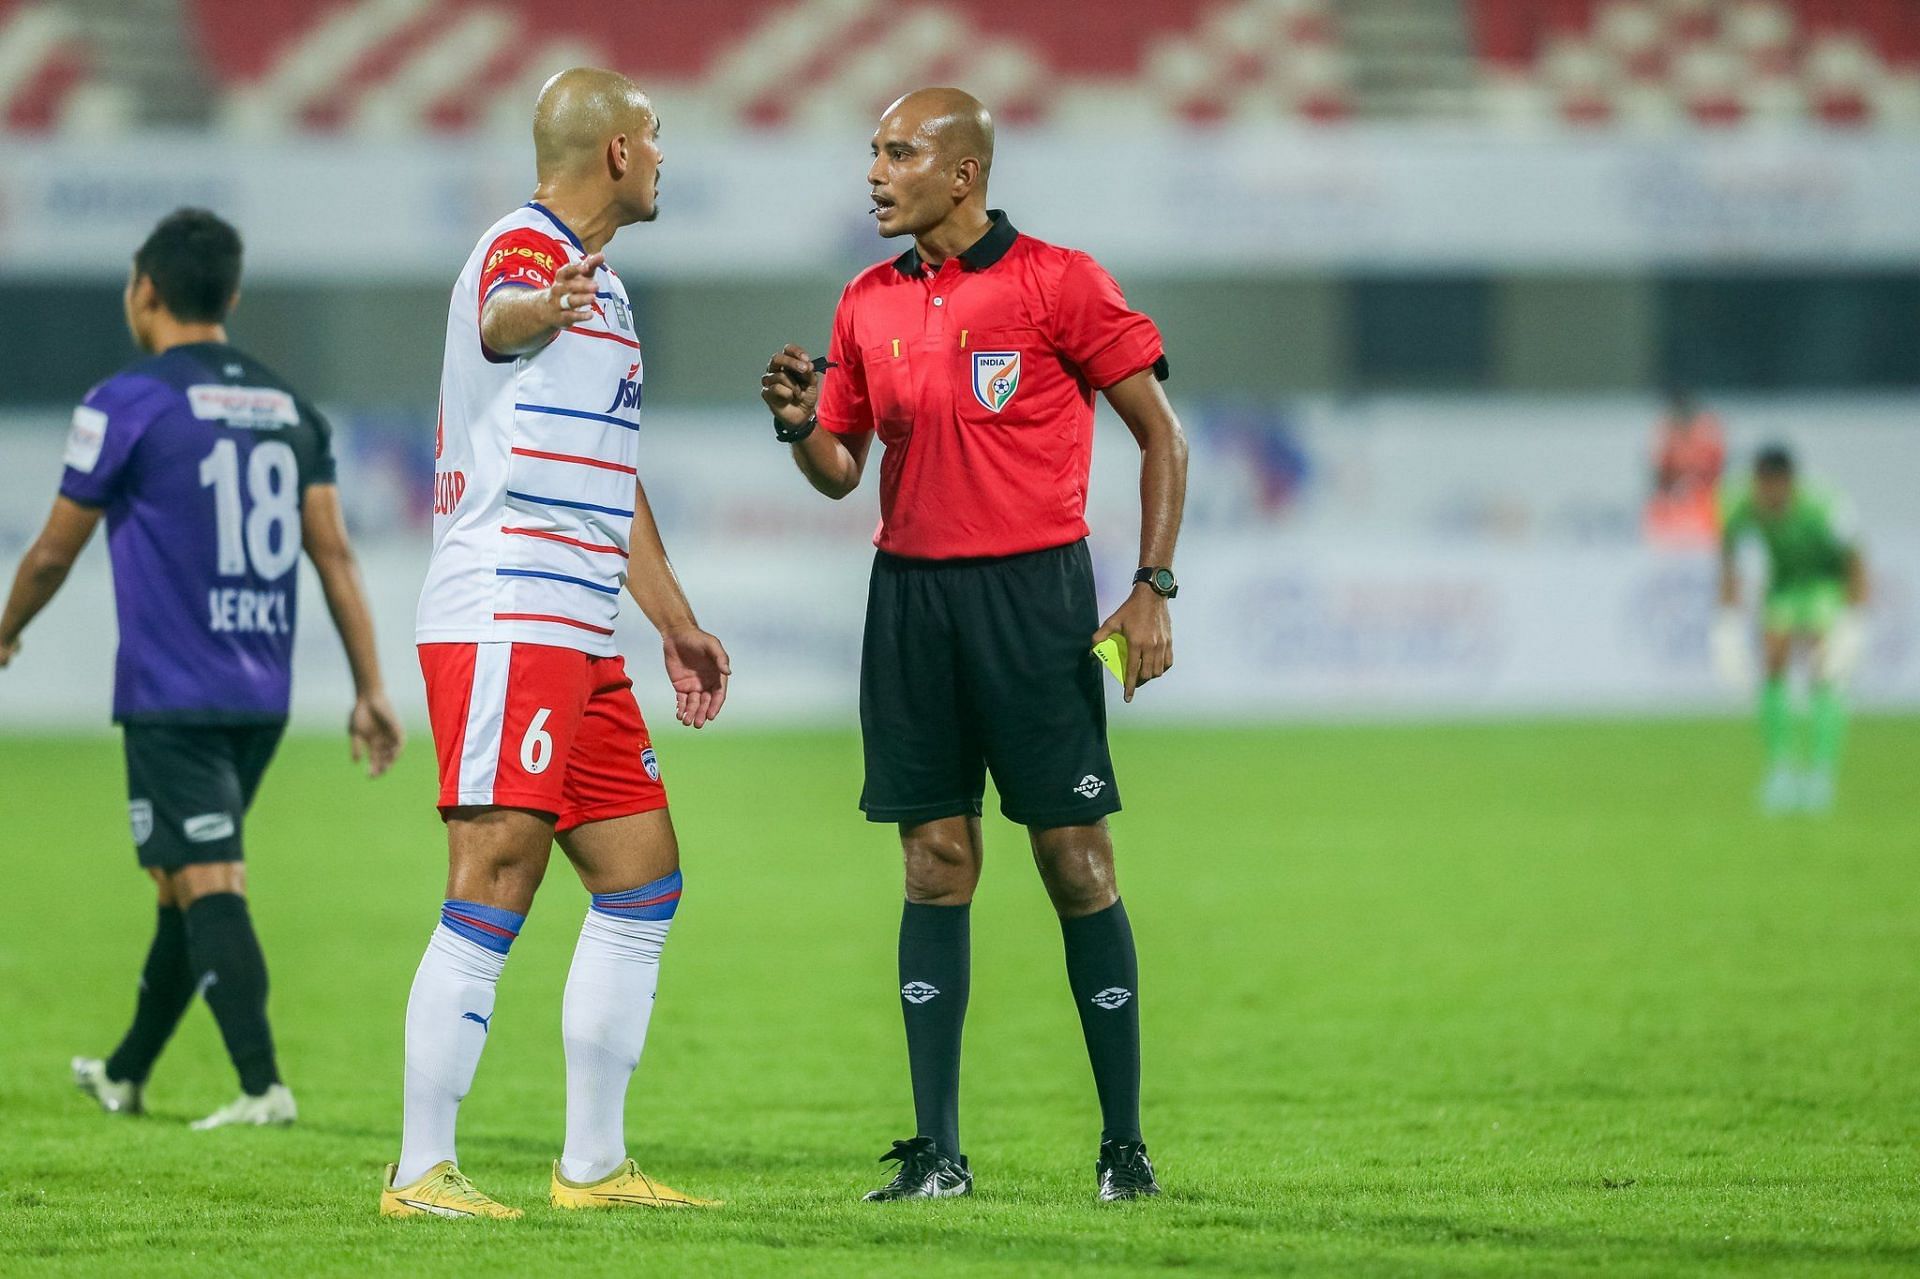 Keziah Veendorp is seen arguing with the referee in the Kalinga Super Cup.